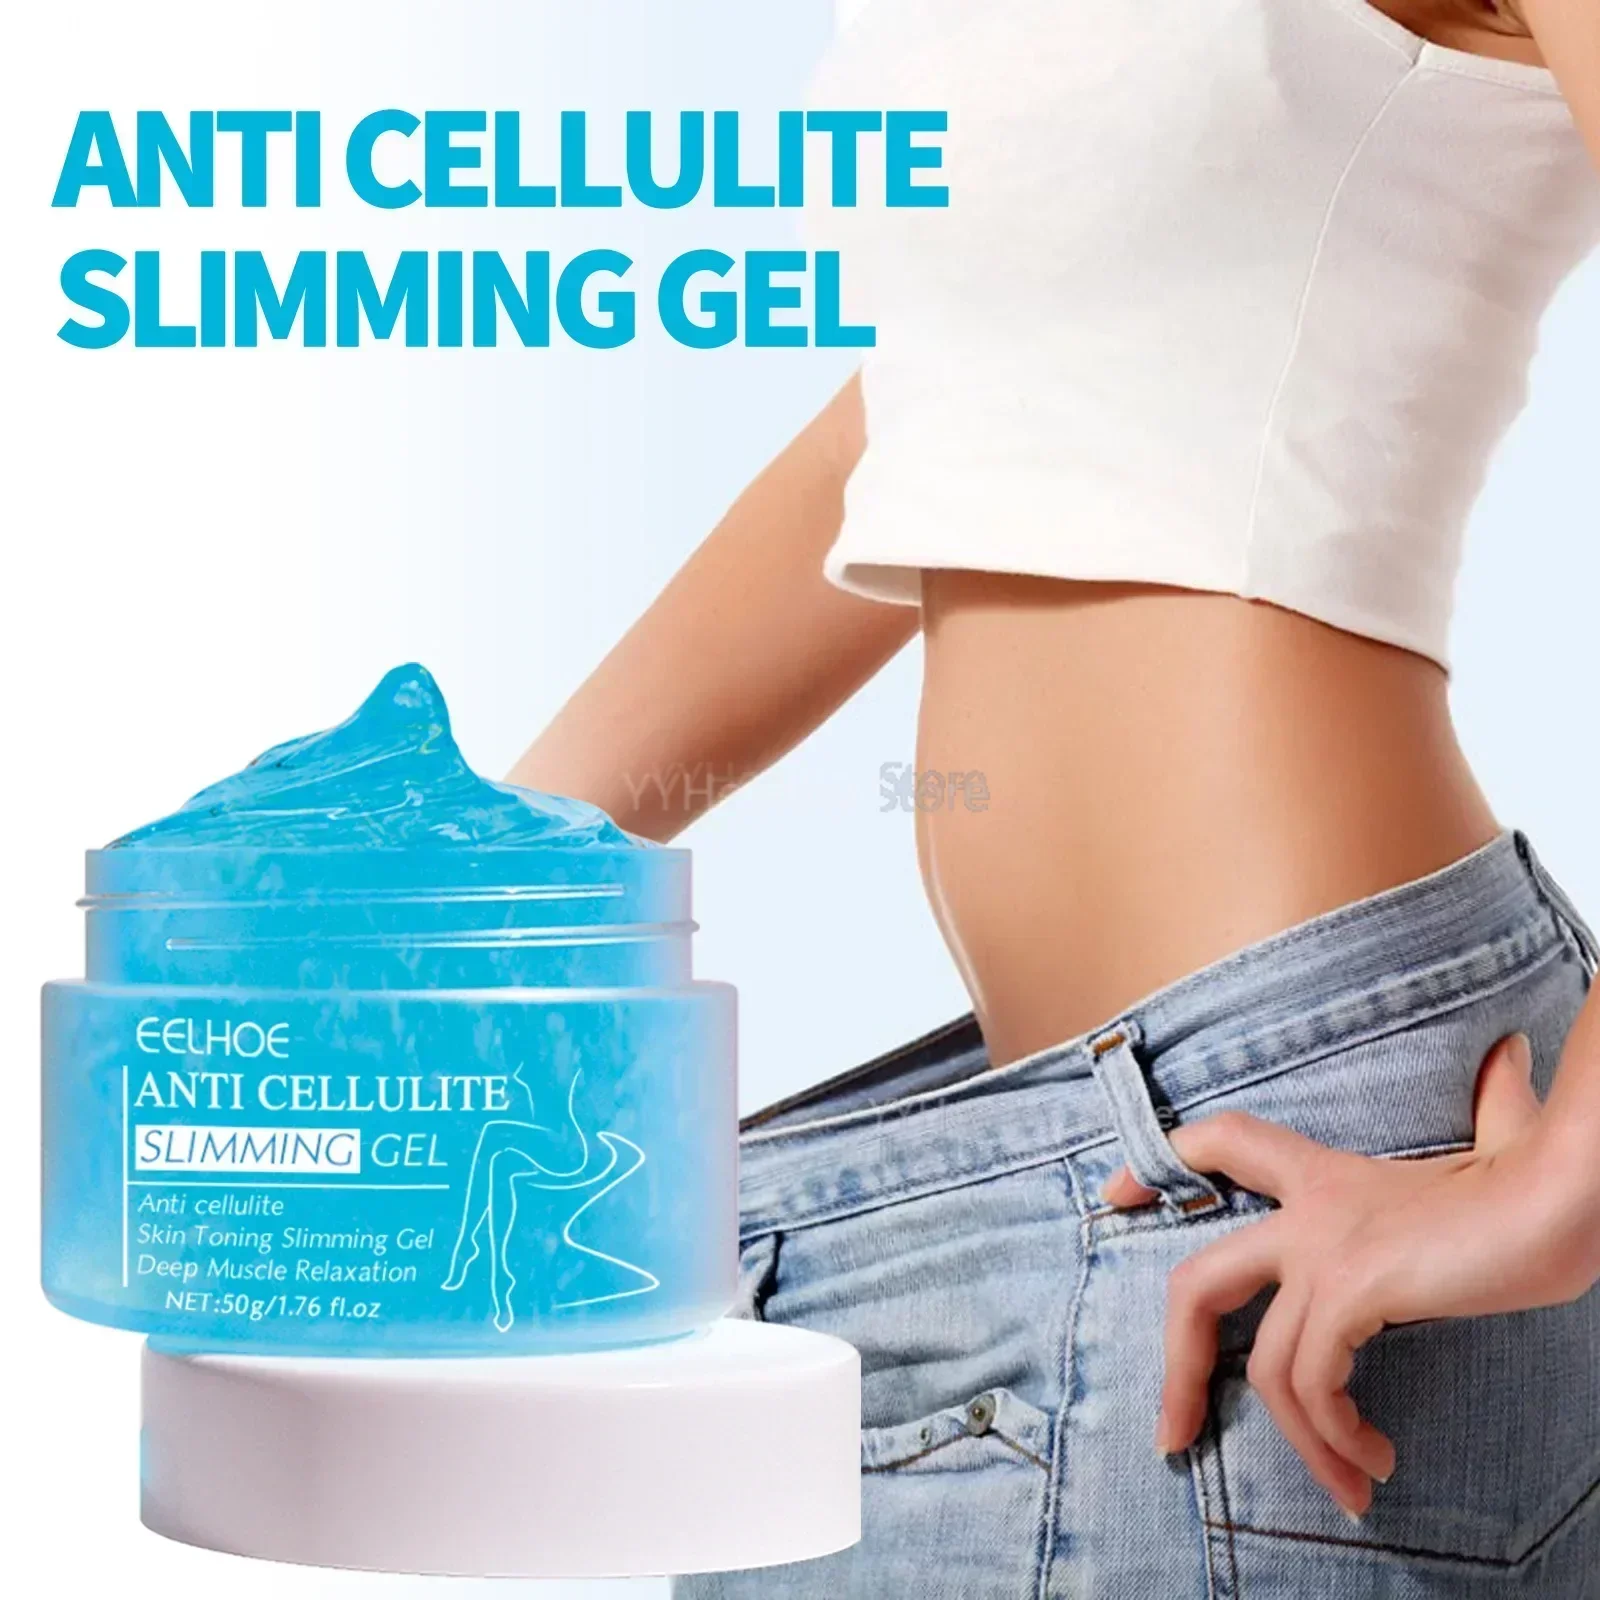 Slimming Product for Abdomen Tummy Fat Burning Hot Cream Loss Weight Cellulite Remover Firming Body Shaping Gel Creatina